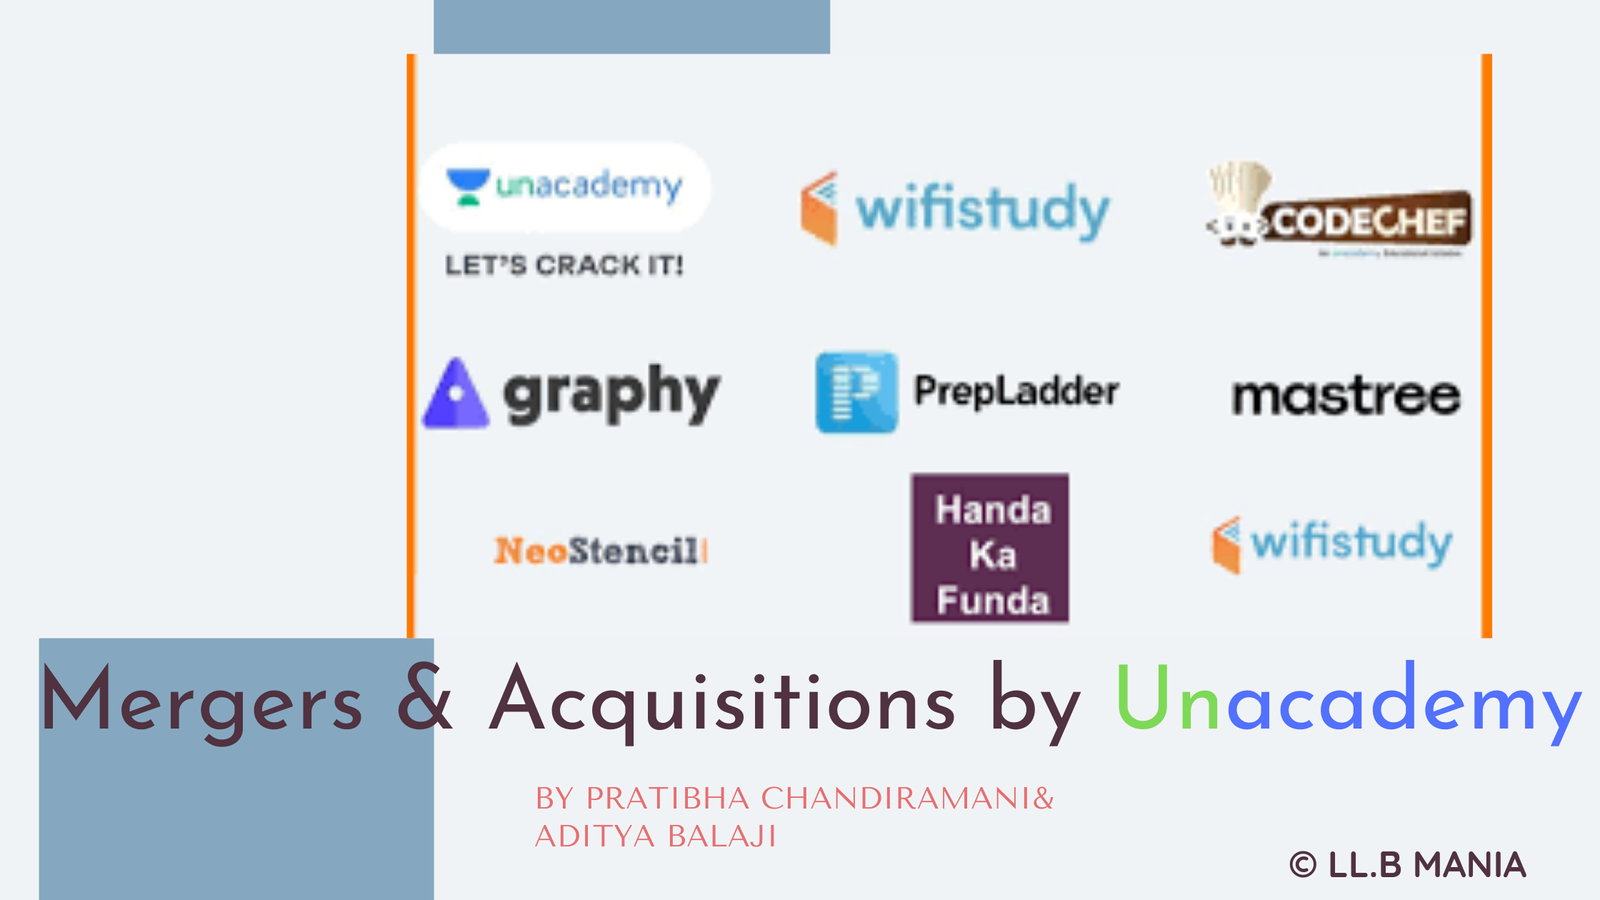 Mergers and Acquisitions by Unacademy